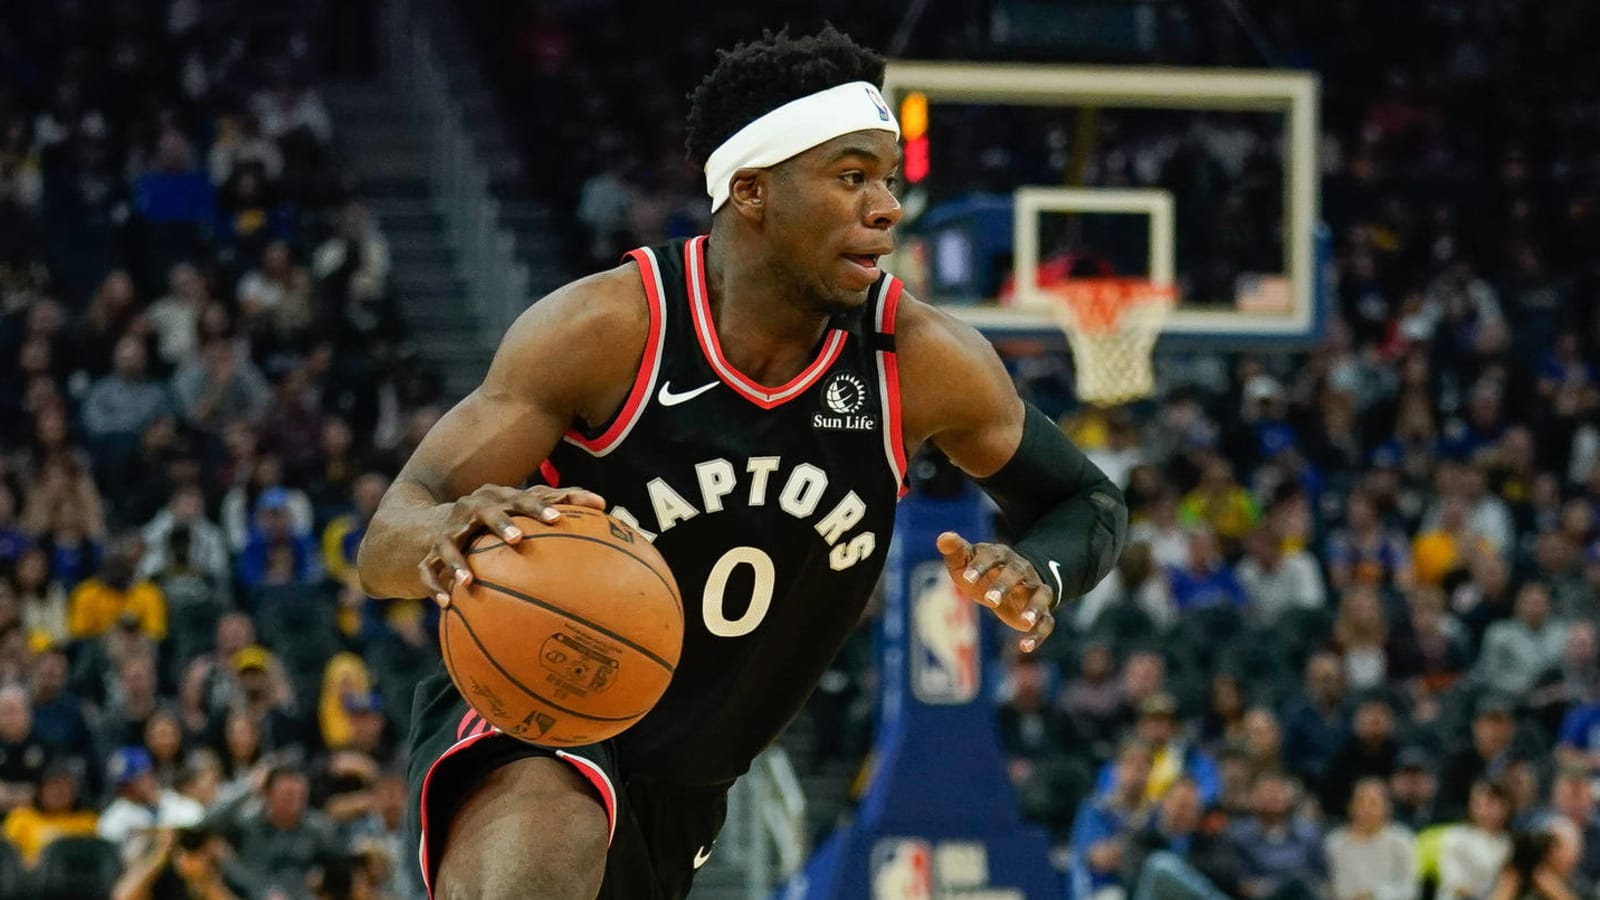 Raptors spoke to Terence Davis about his viral photo of mask with hole in it